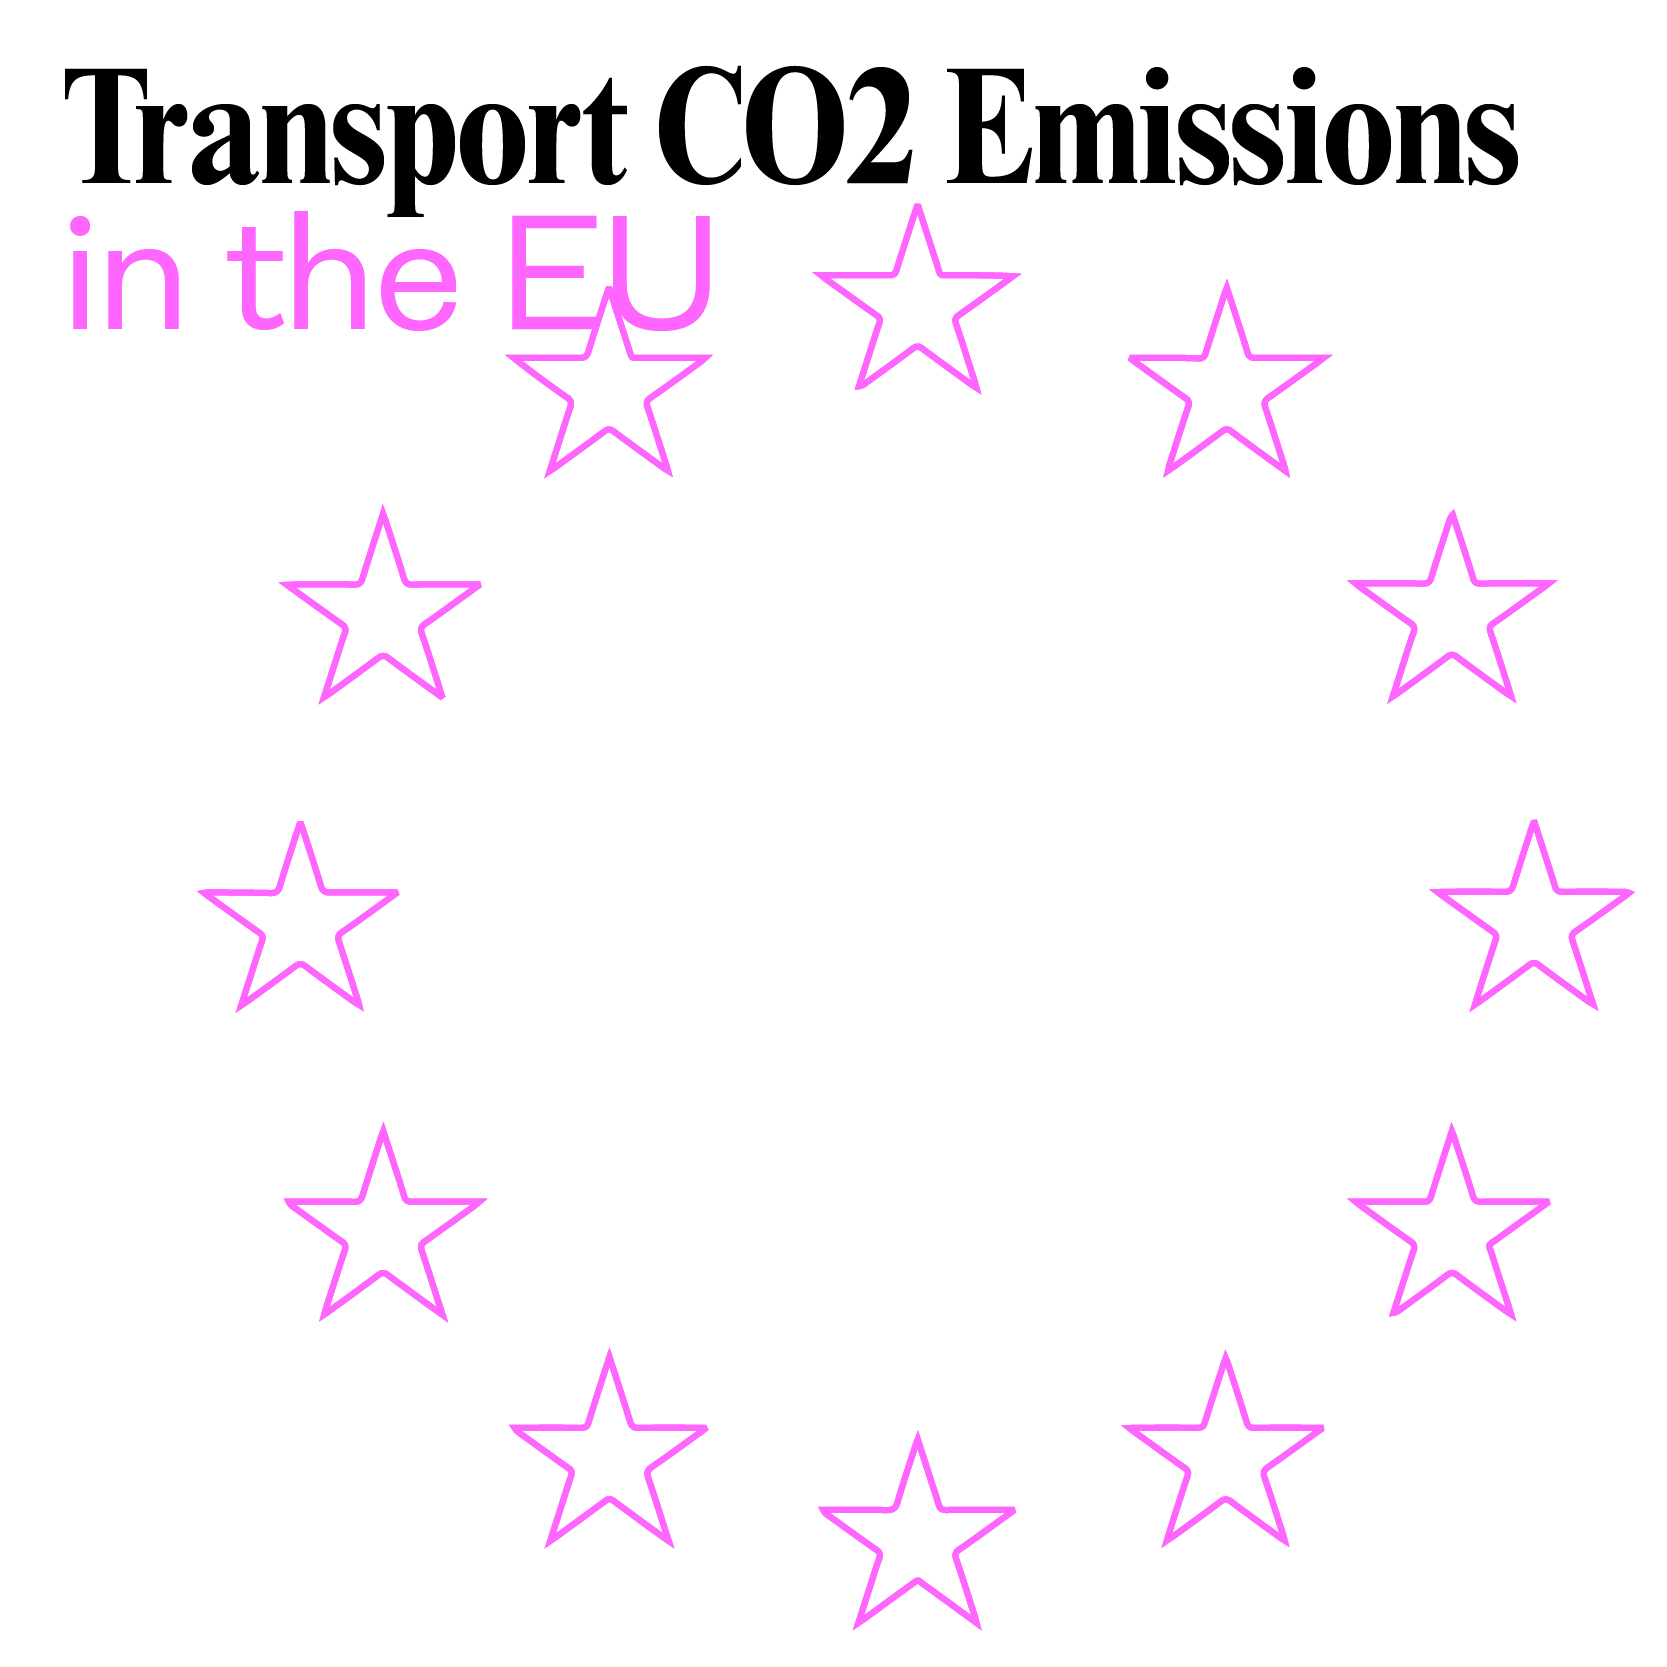 Transport CO2 Emissions in the EU